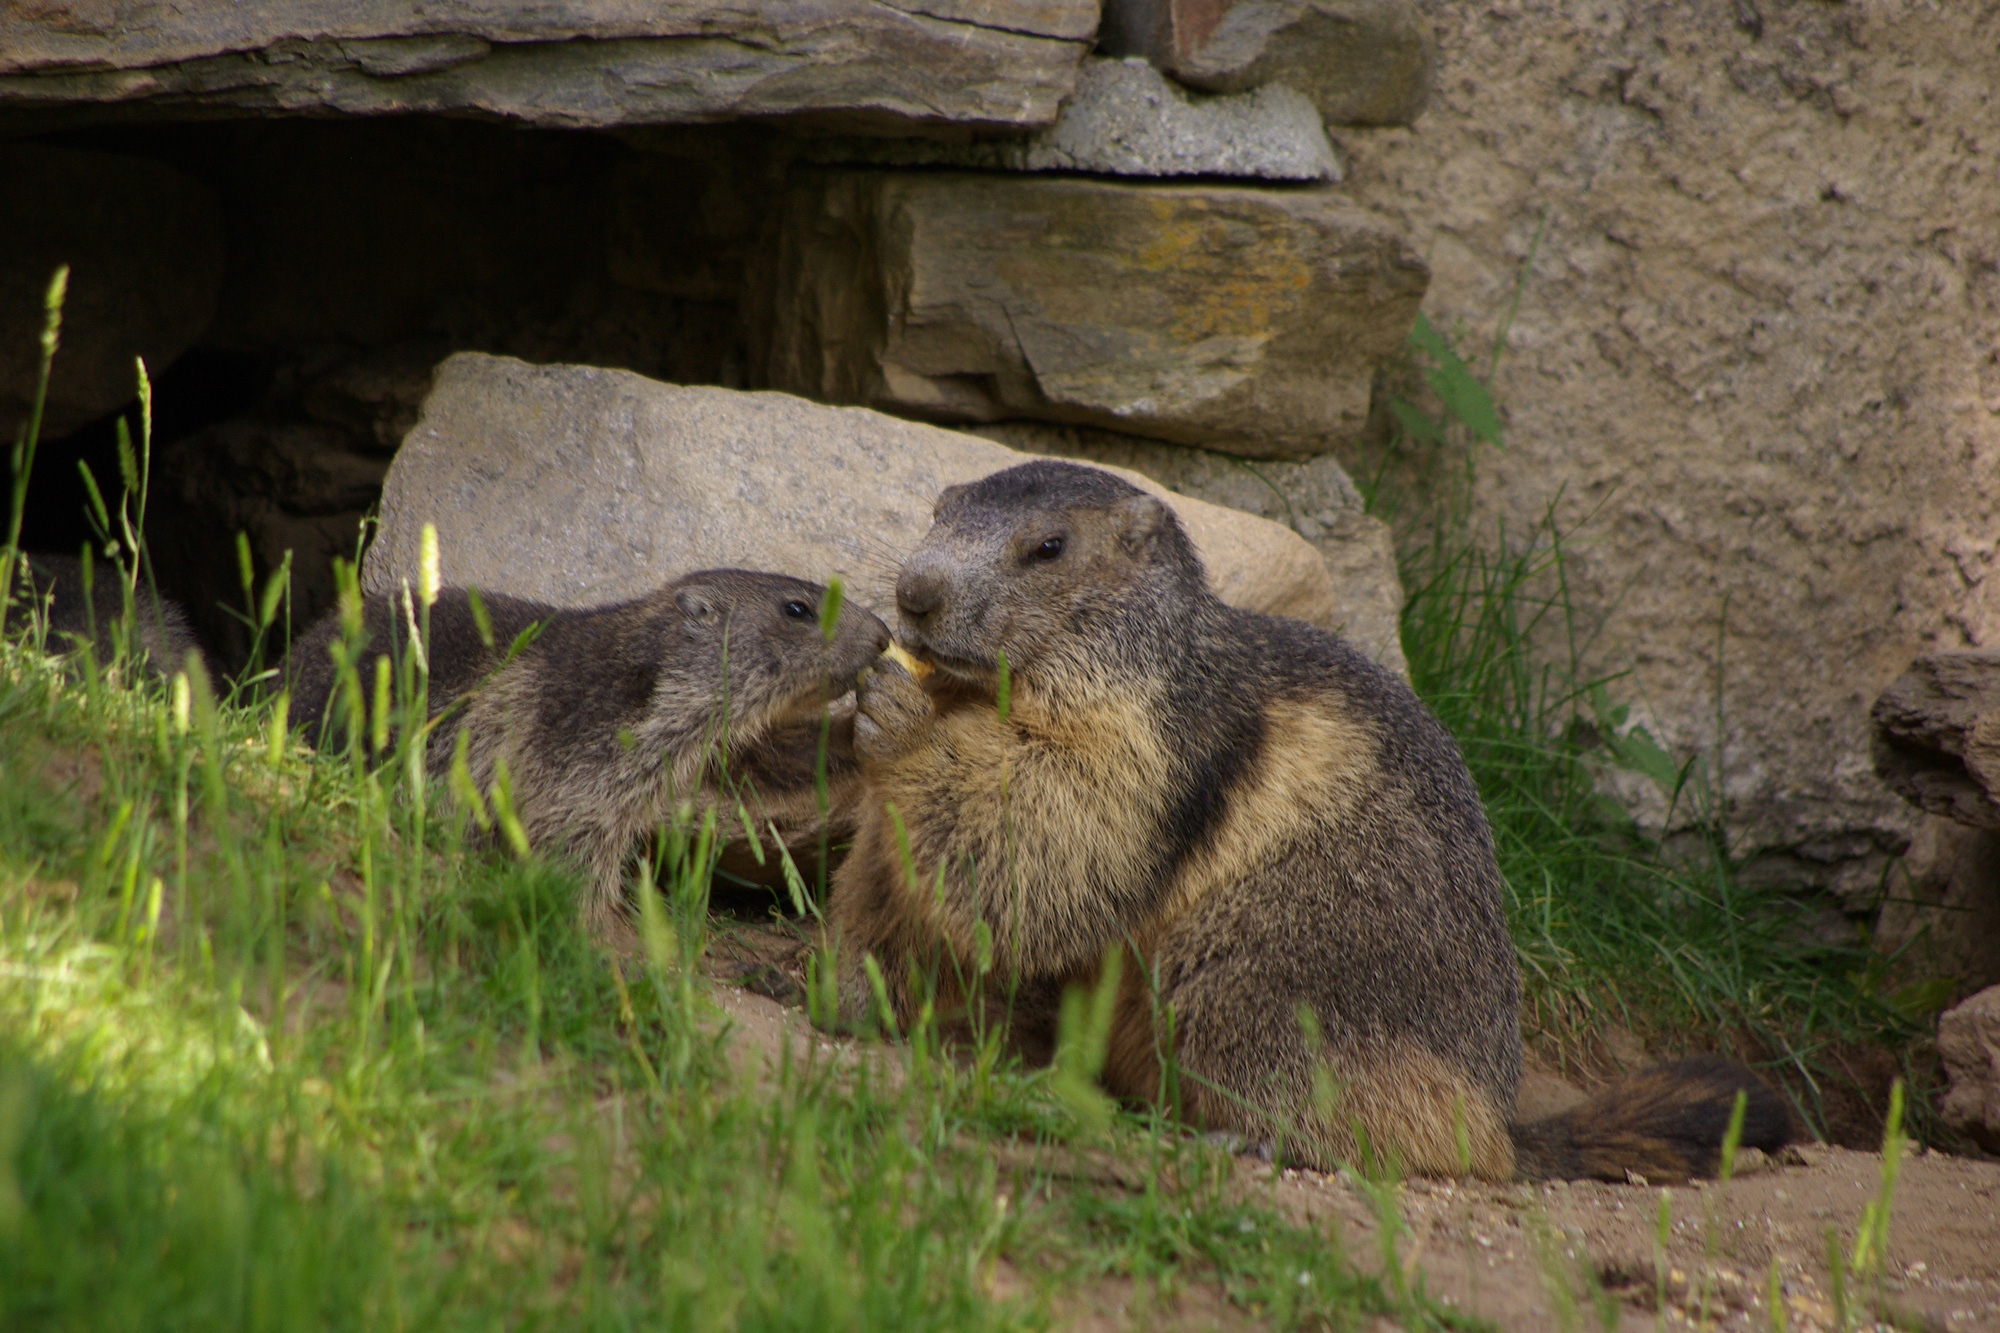 Two marmots in front of the burrow